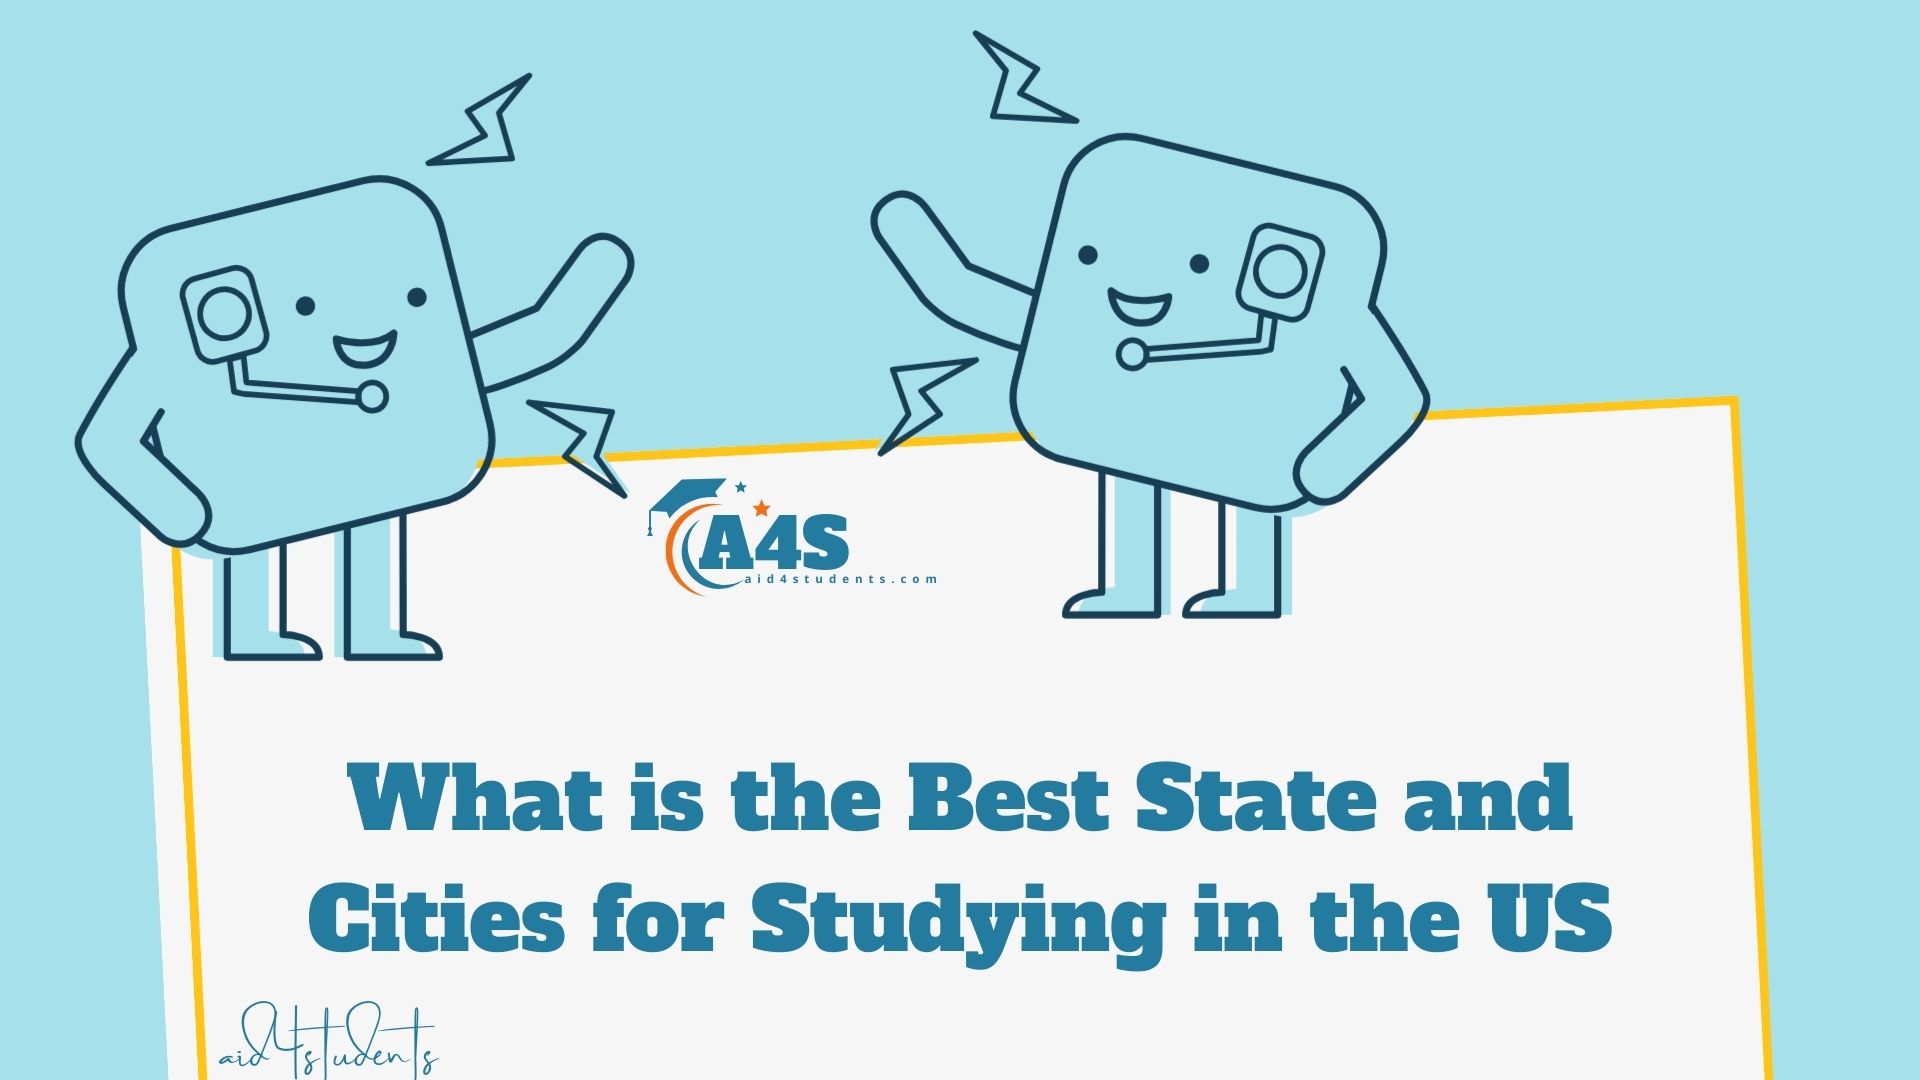 What is the Best State and Cities for Studying in the US